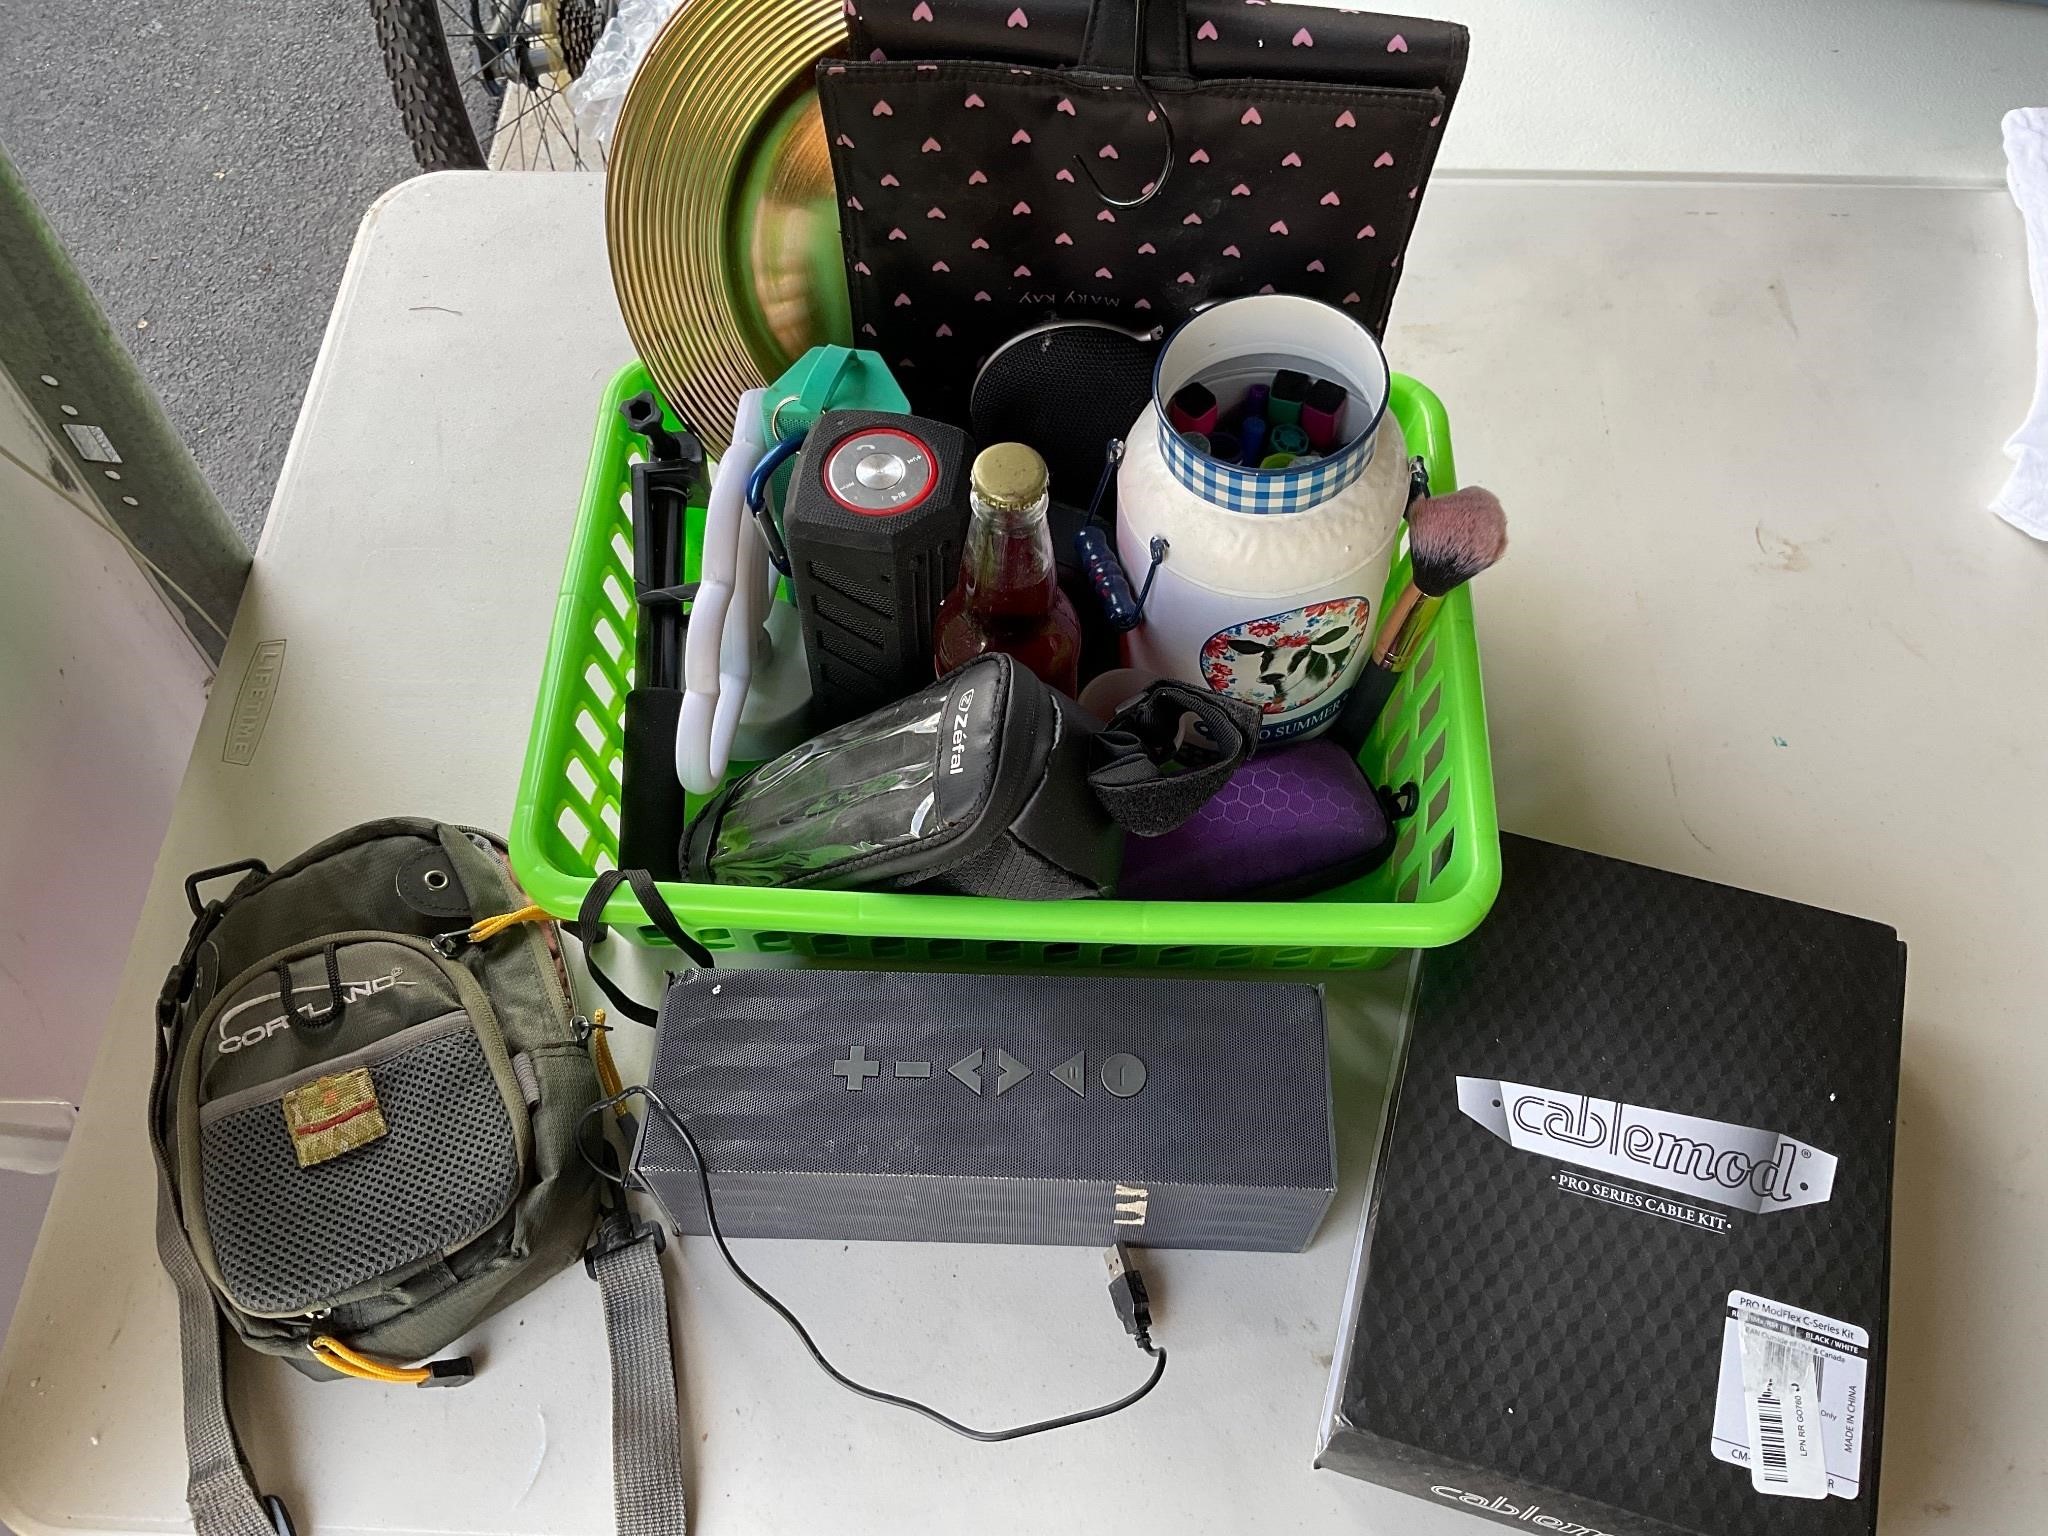 Basket with speakers and miscellaneous